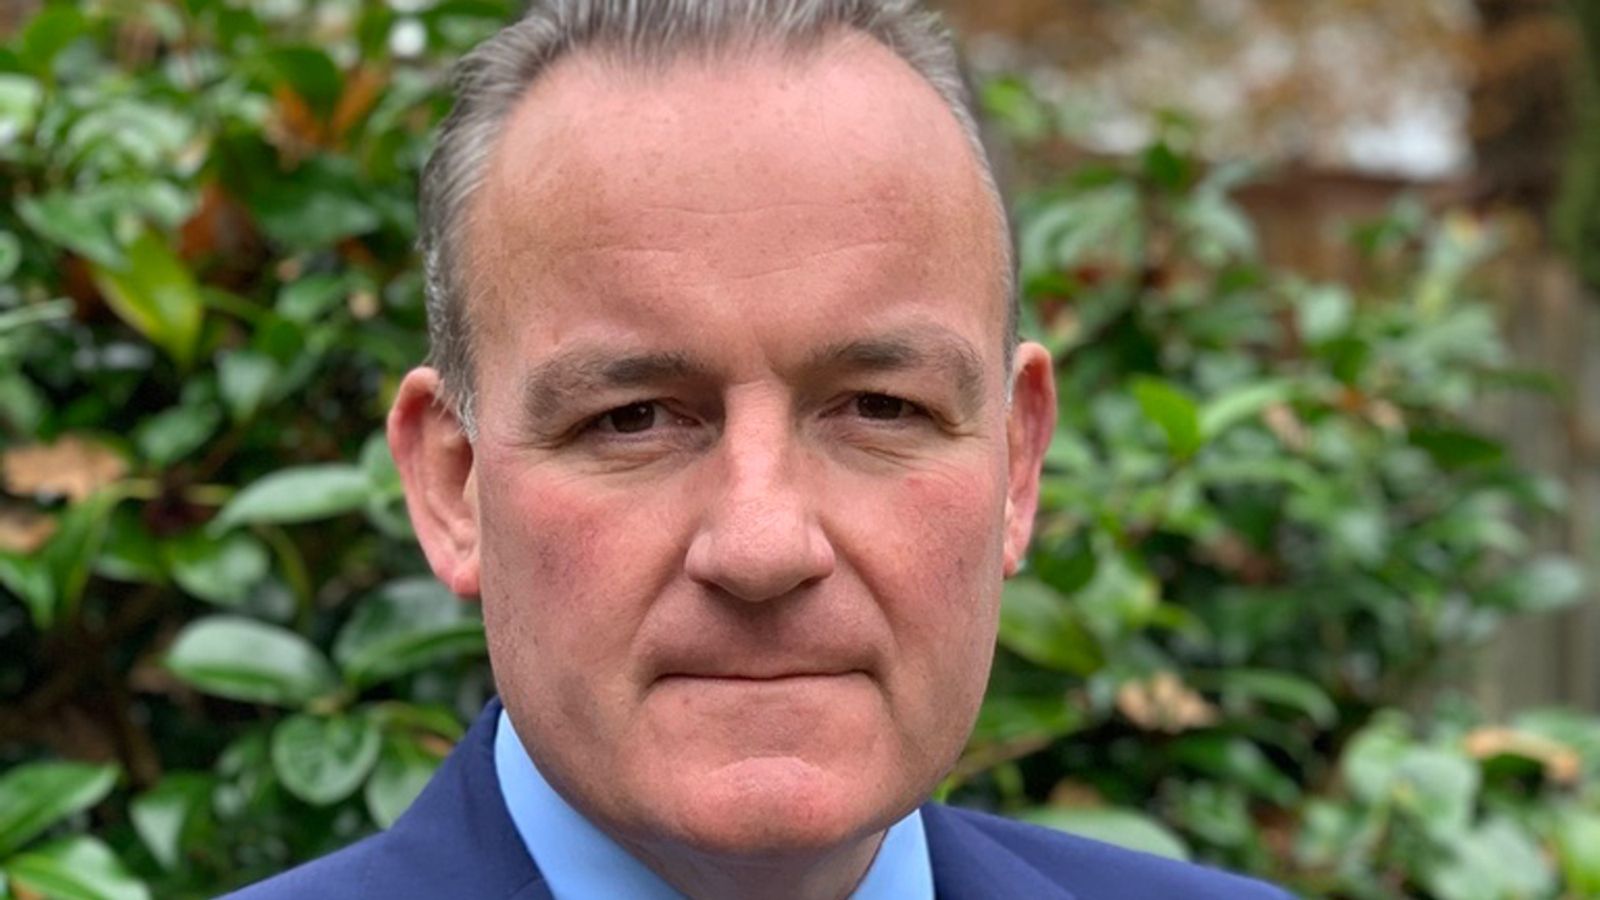 Home Office fires chief inspector of borders and immigration David Neal